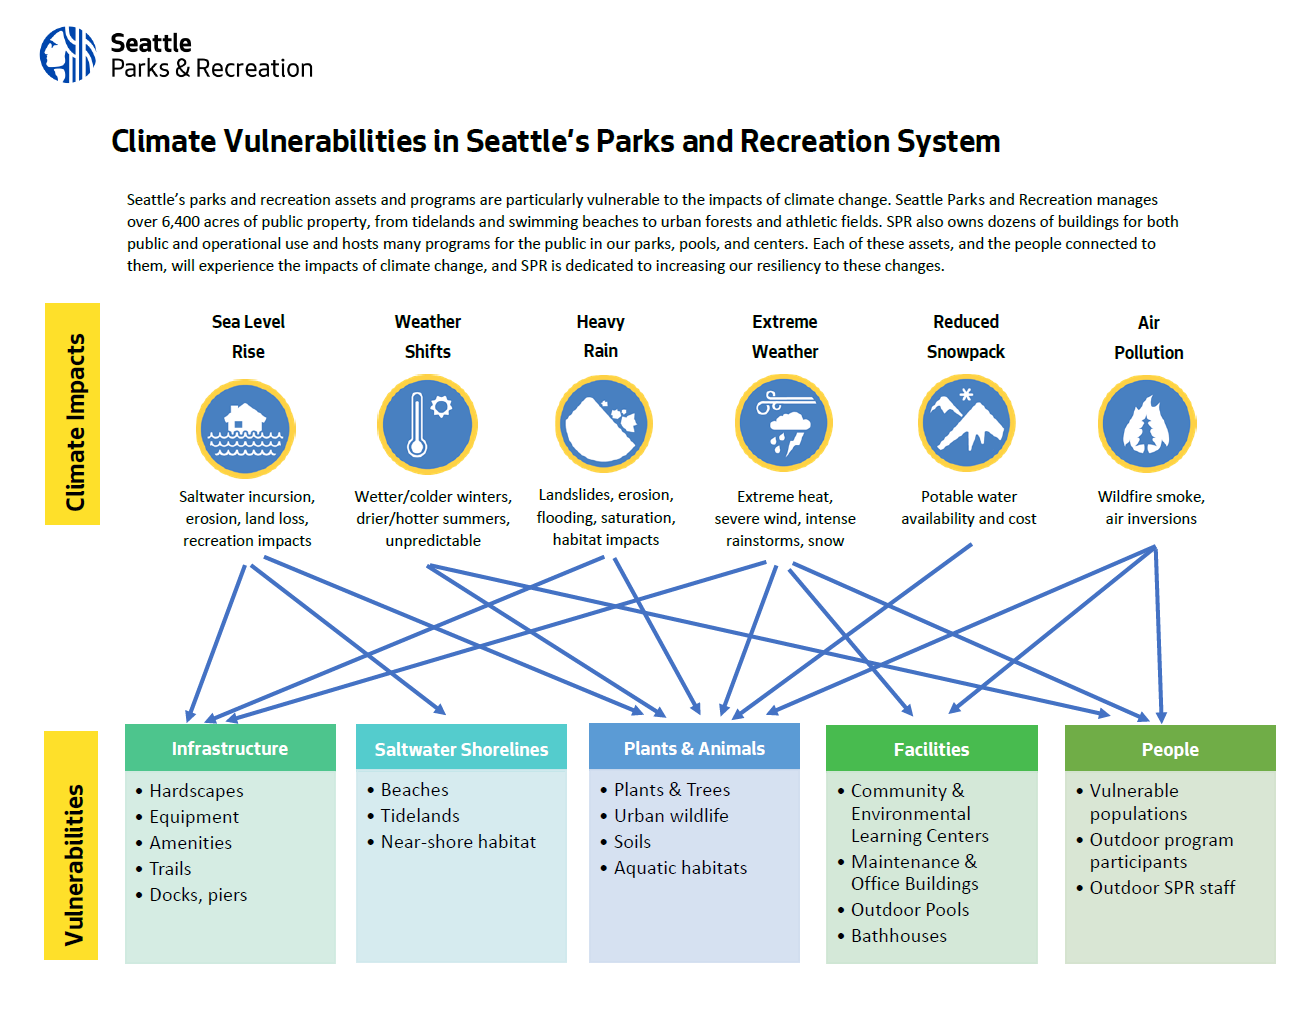 A stylized graphic outlines Climate Vulnerabilities in Seattle’s Parks and Recreation System, highlighting how sea level rise, weather shifts, heavy rain, extreme weather, reduced snowpack, and air pollution will  impact  our infrastructure, shorelines, plants, animals, facilities and people of the city and park system.